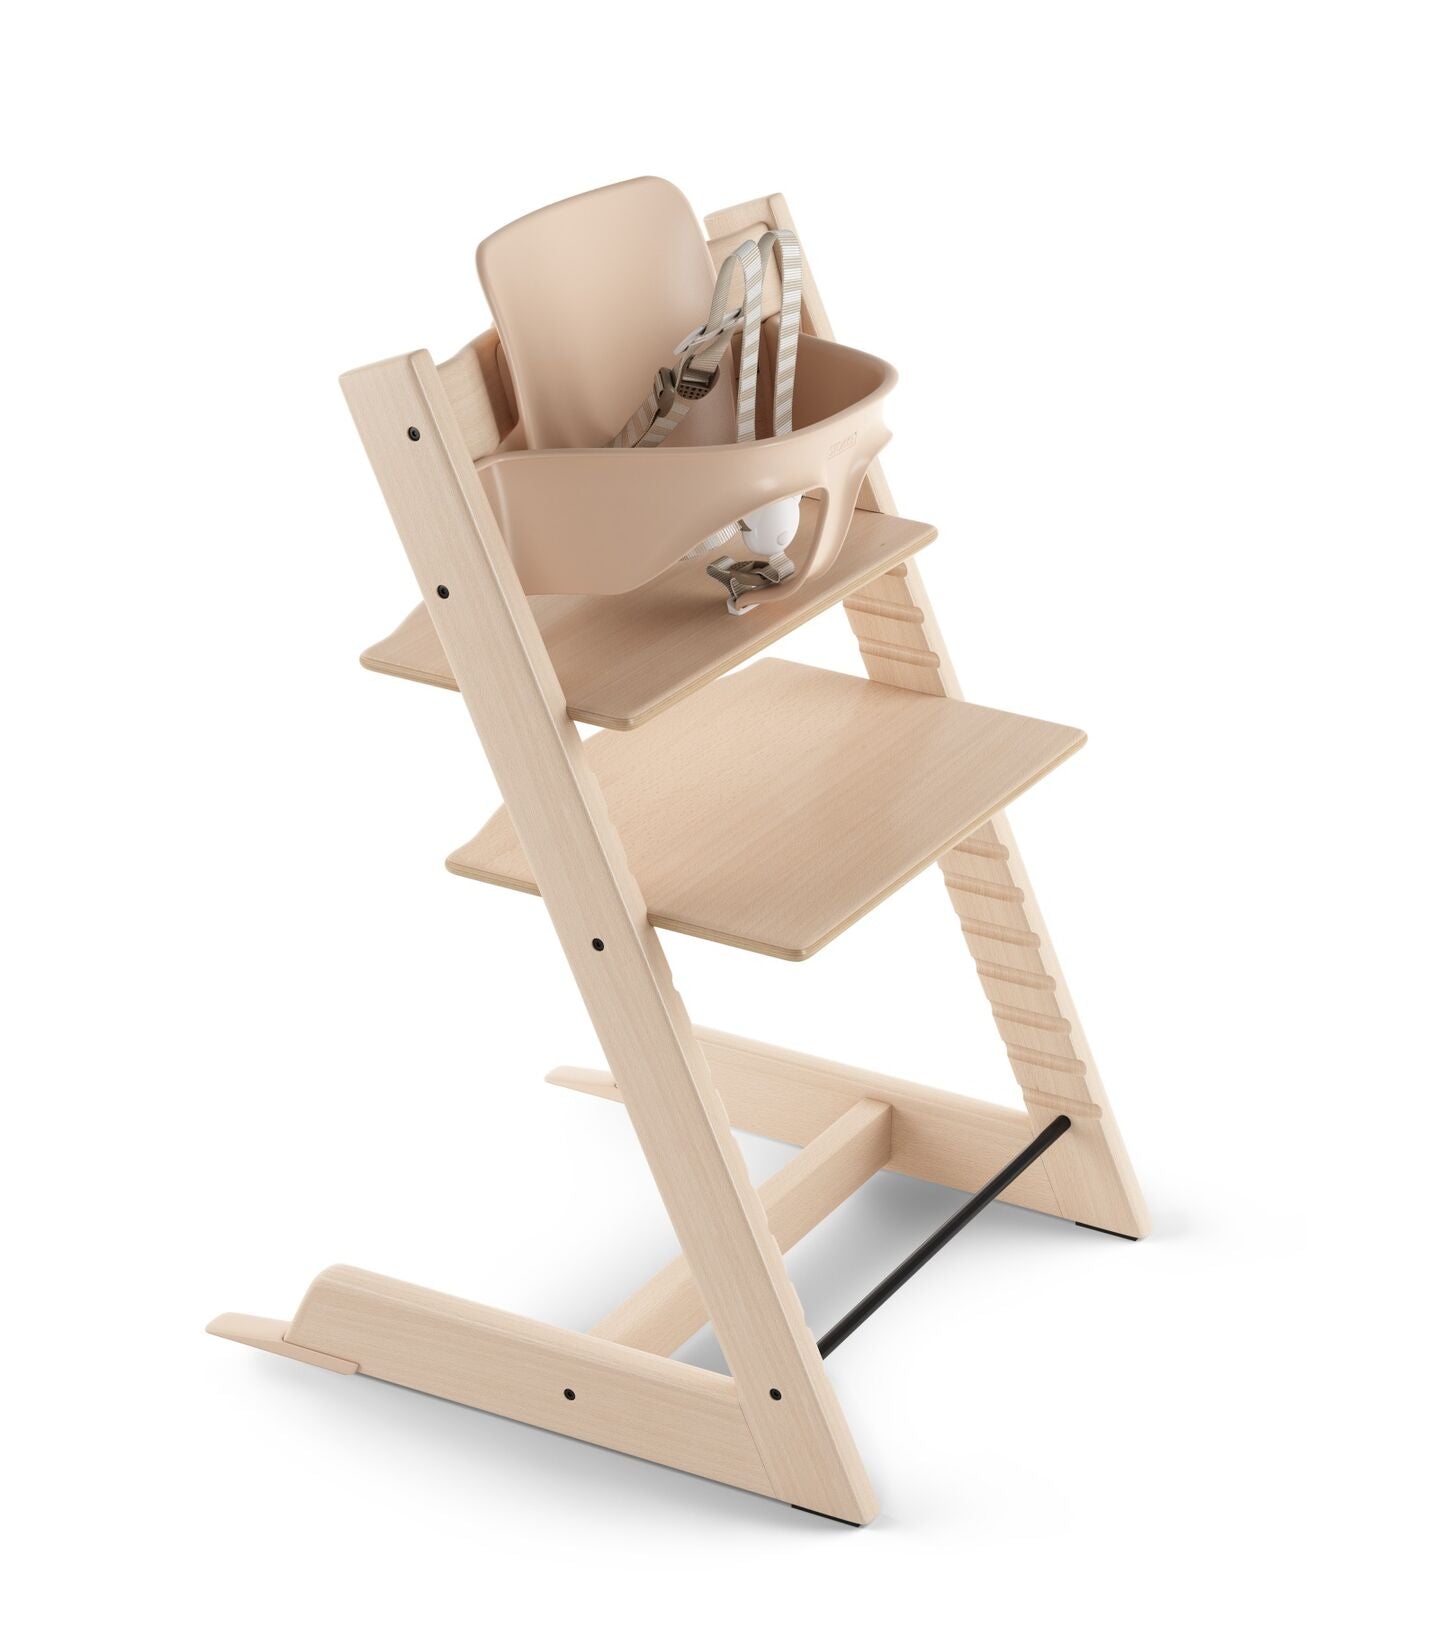 Stokke Adjustable Ergonomic Tripp Trapp Baby Set with Harness - ANB Baby -$75 - $100